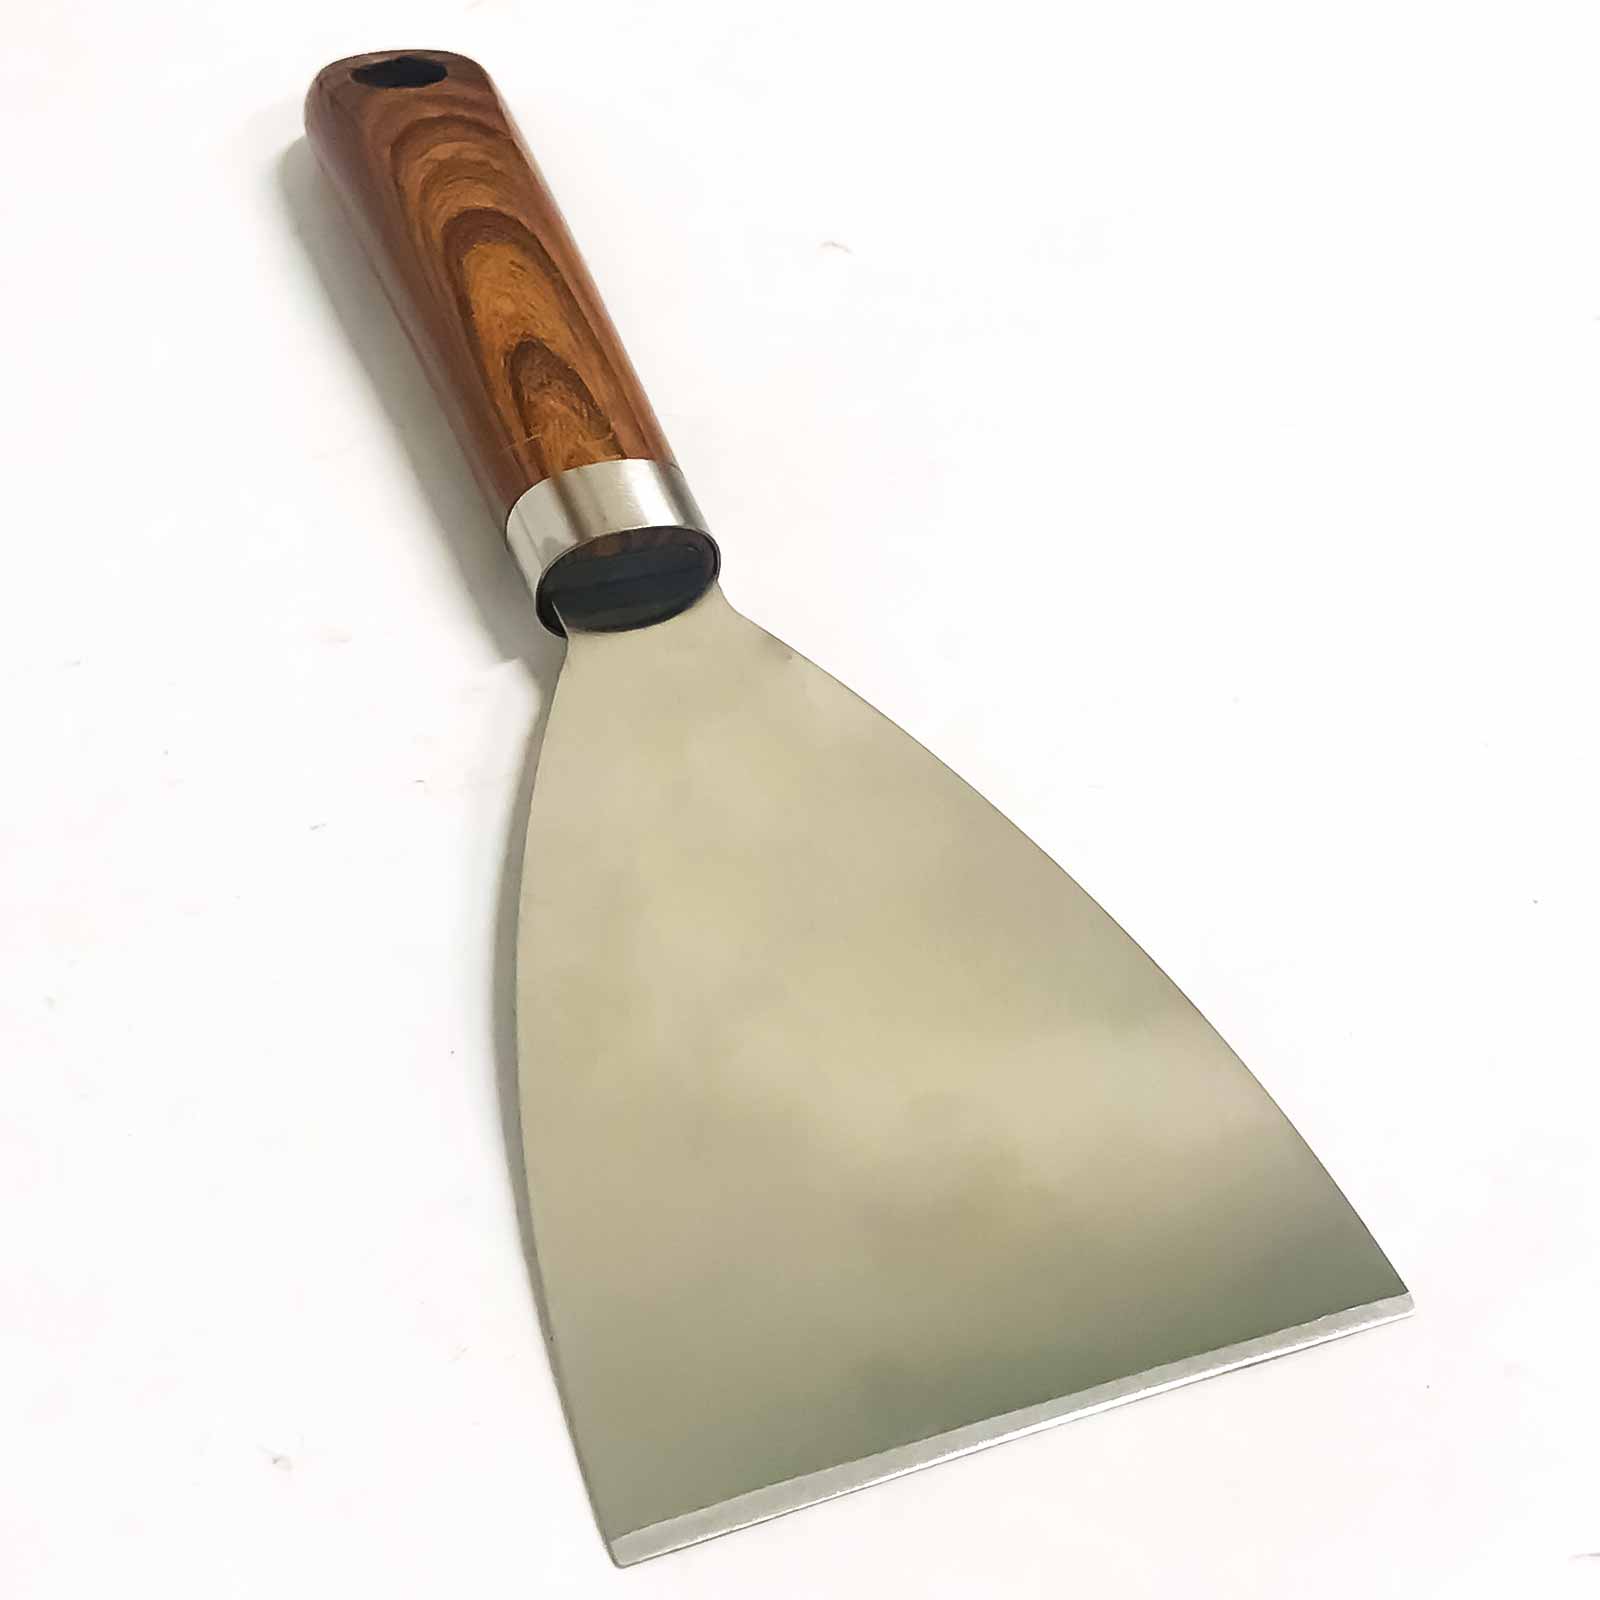 Wooden Handle Cake Cutting, Lifter Knife